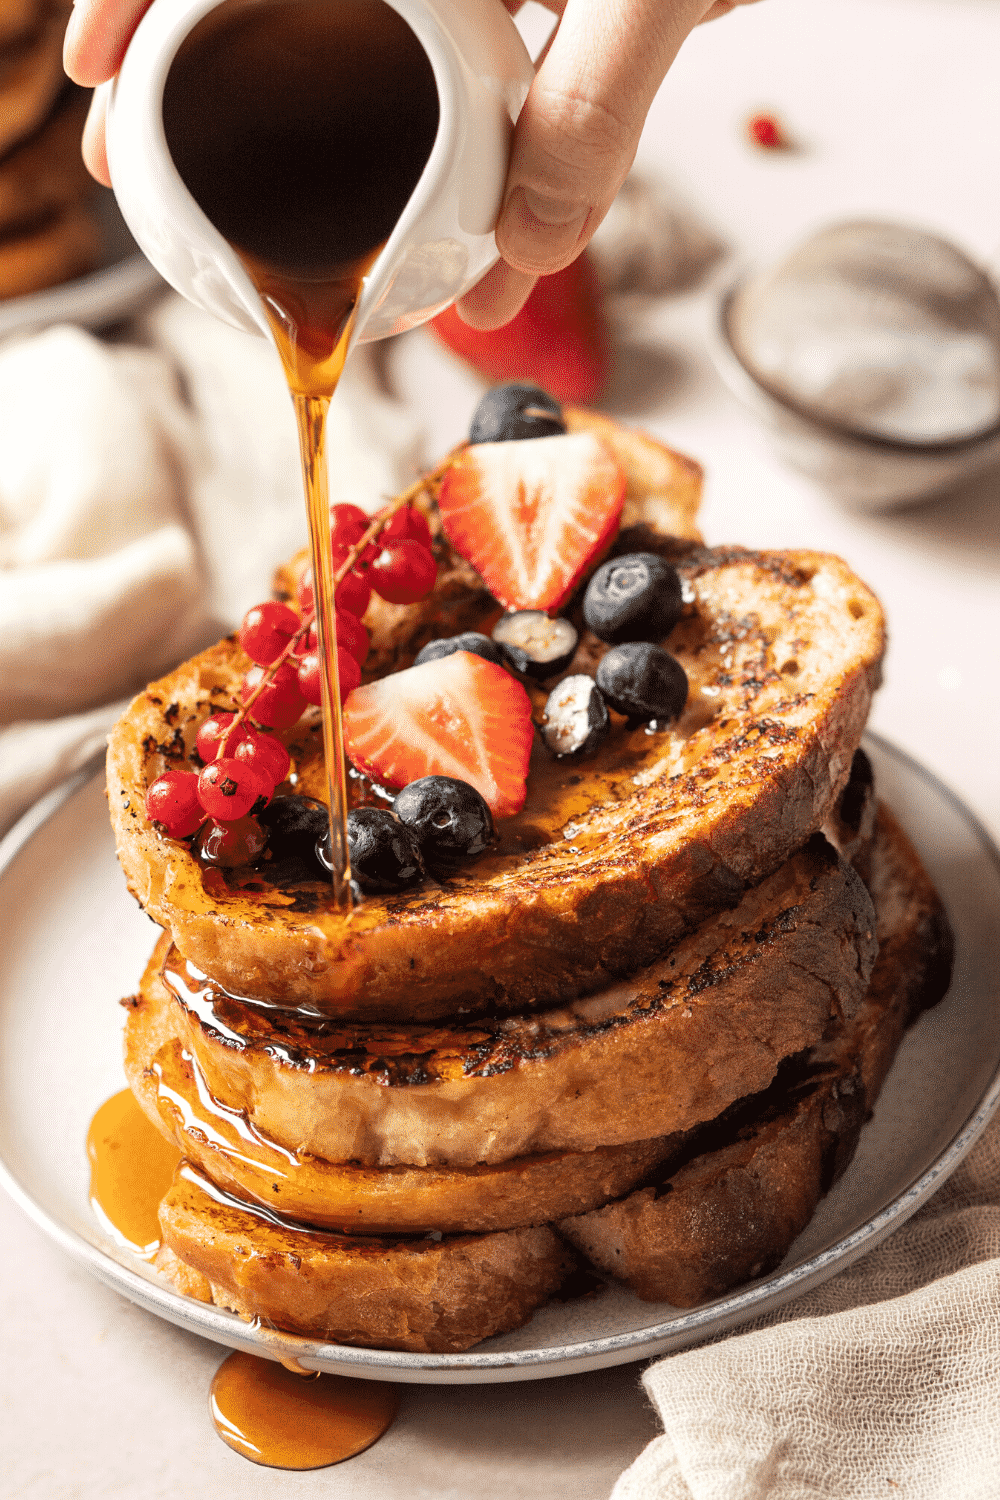 Four slices of French toast stacked on top of one another on a white plate. Fresh fruit is on the top slice of French toast and maple syrup is being poured over the stack.